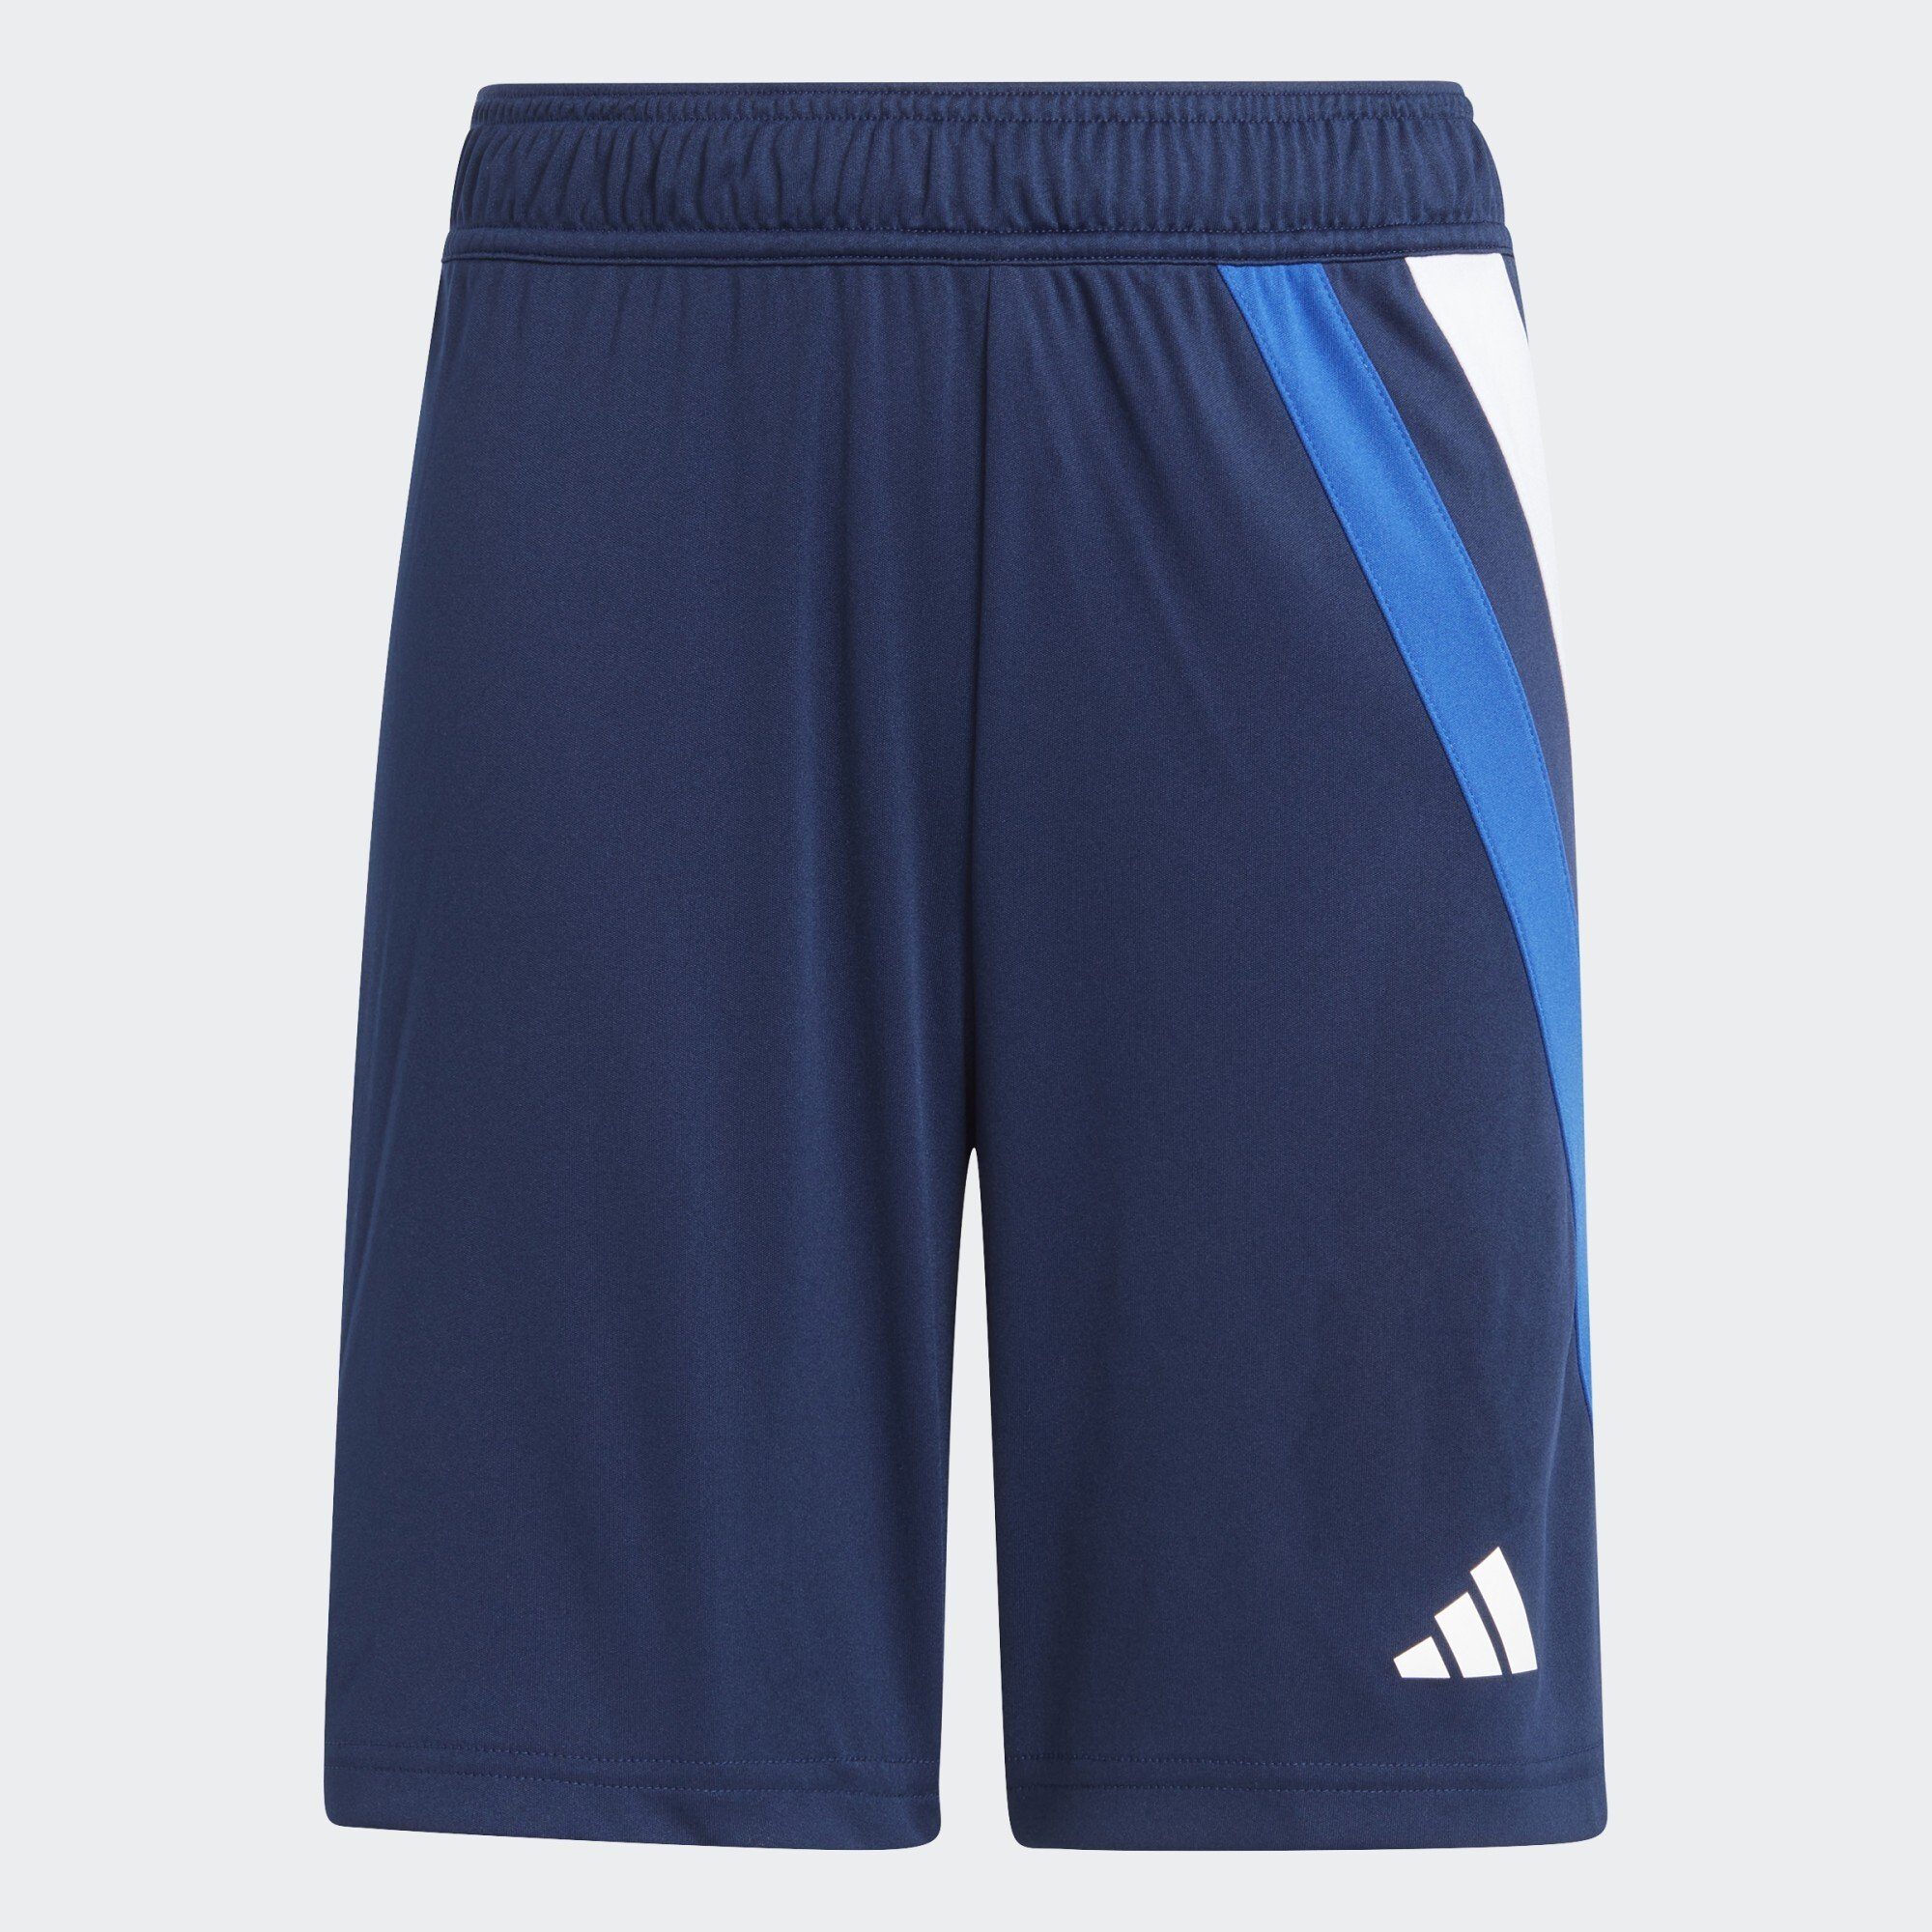 adidas Performance Funktionsshorts FORTORE 23 Navy Collegiate White SHORTS / Team Royal Red / Team 2 Blue Blue 